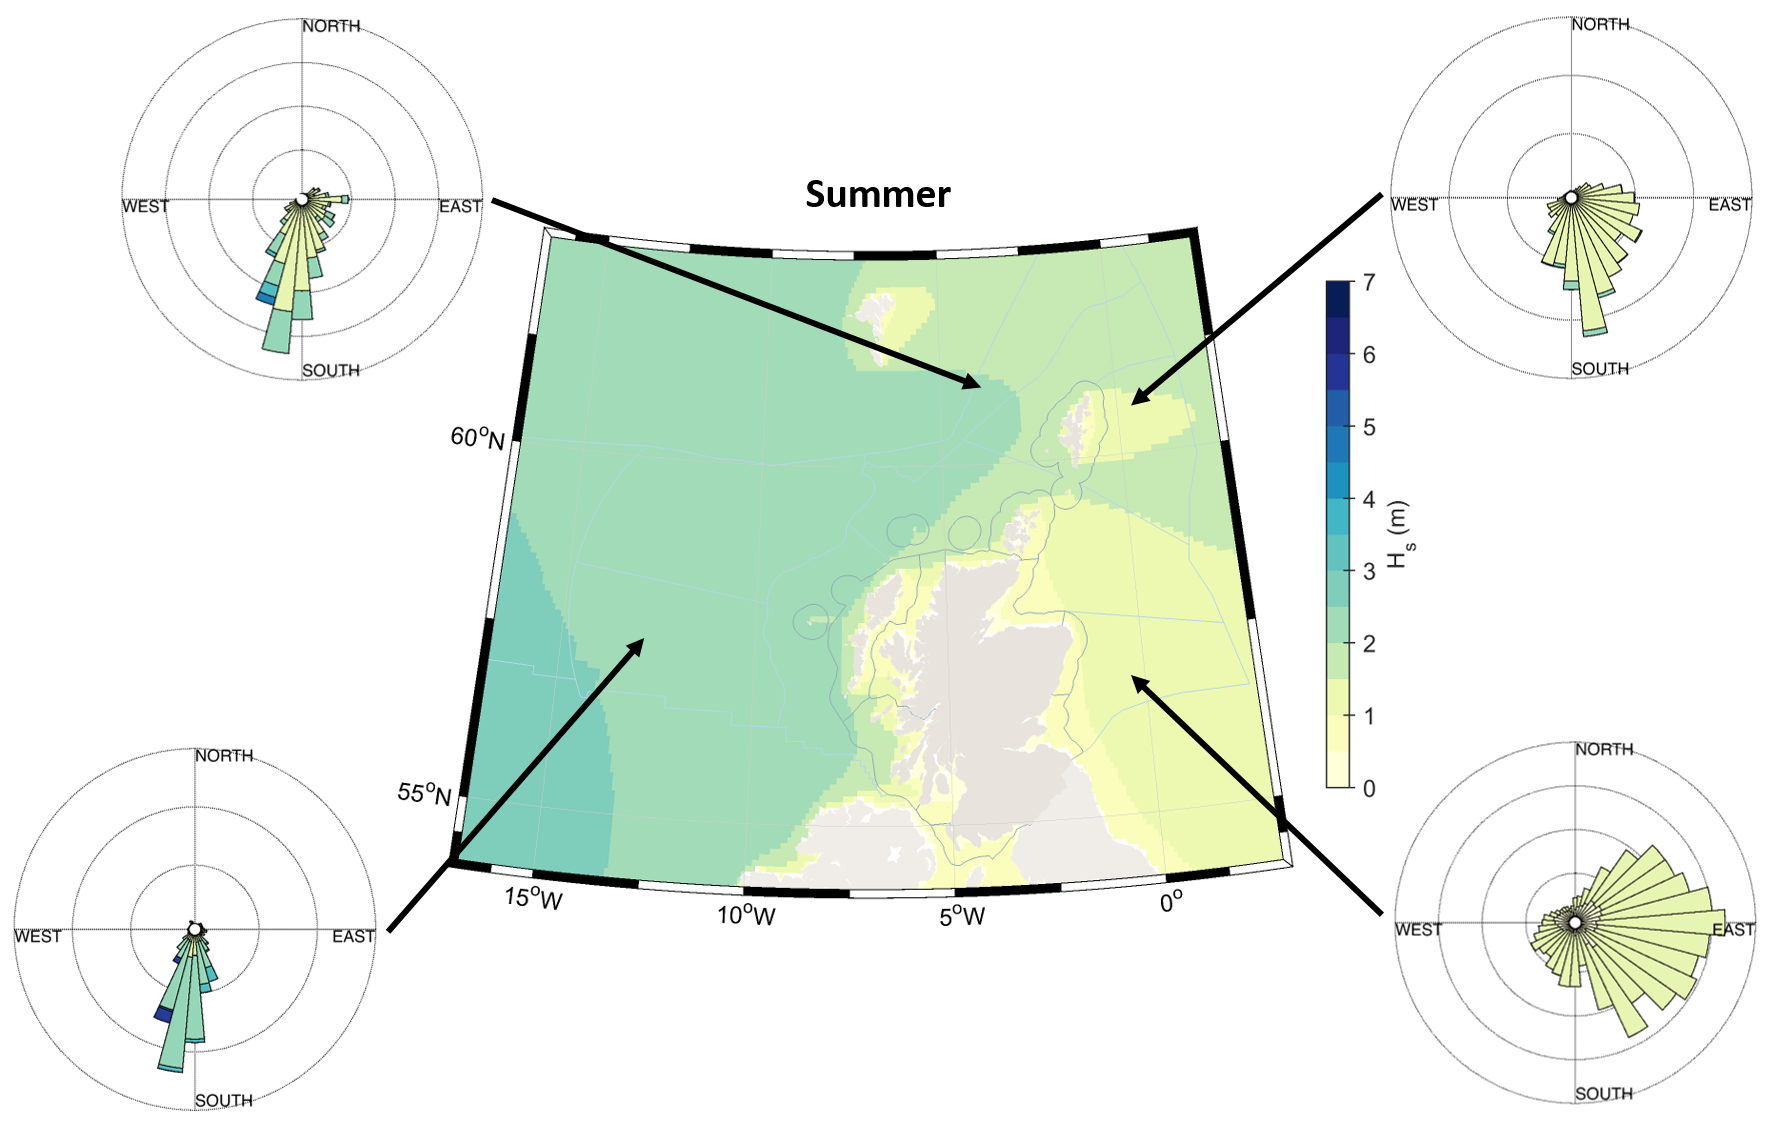 Figure 2: Summer (May - July) climatological average significant wave heights across Scottish waters